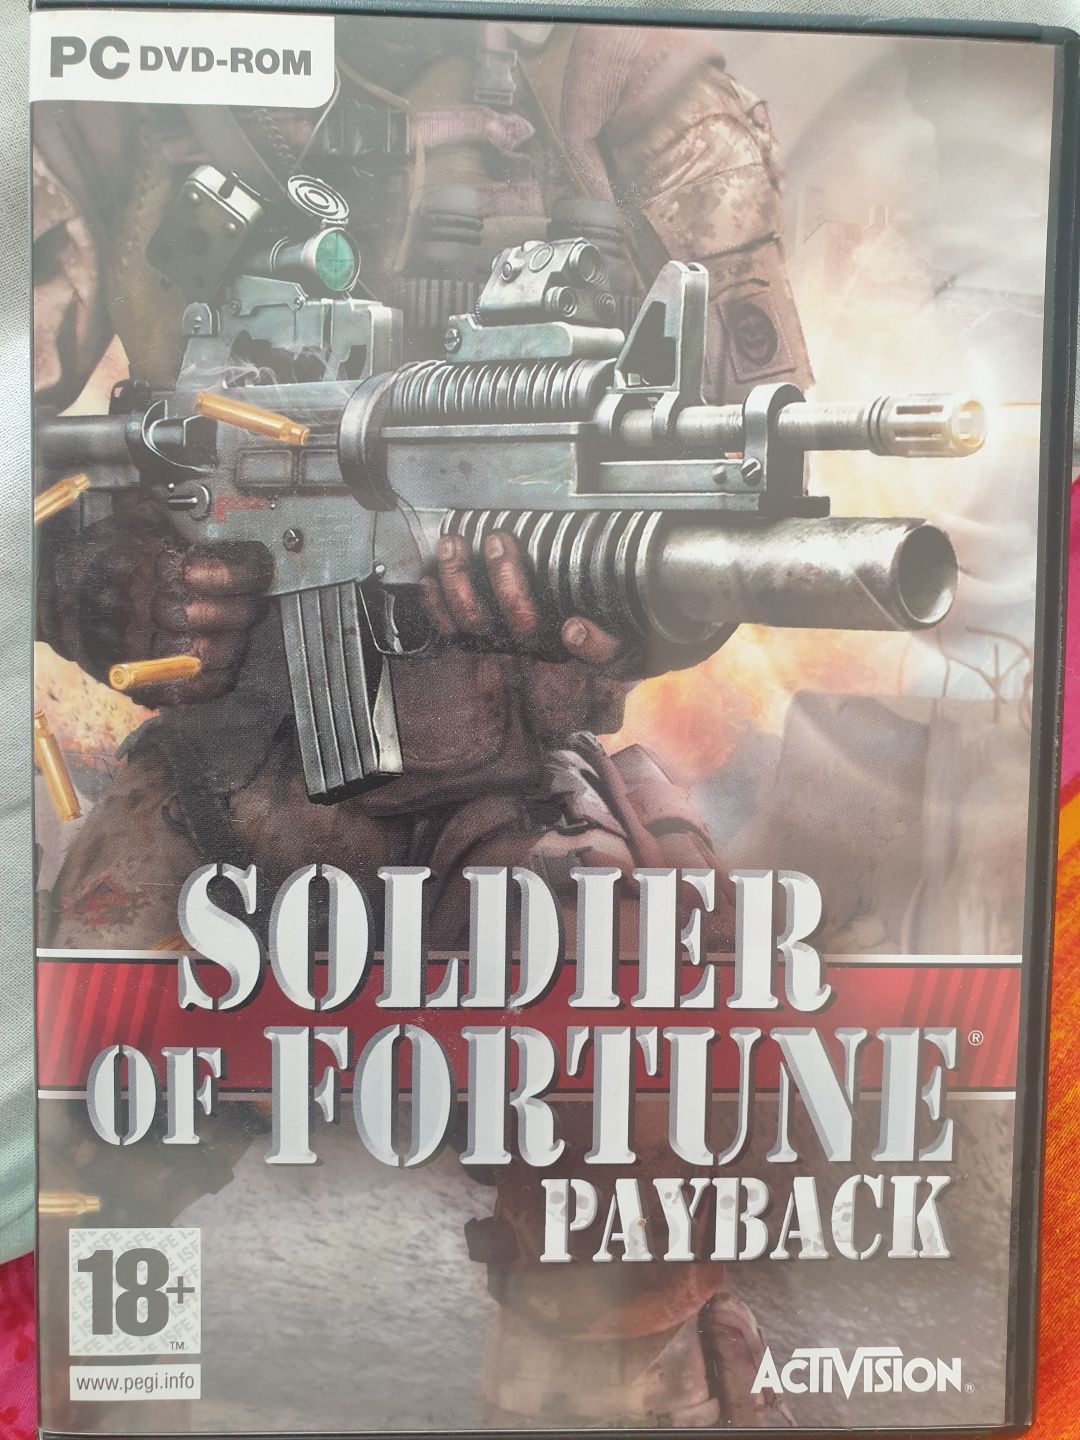 Soldier of fortune payback  nowa